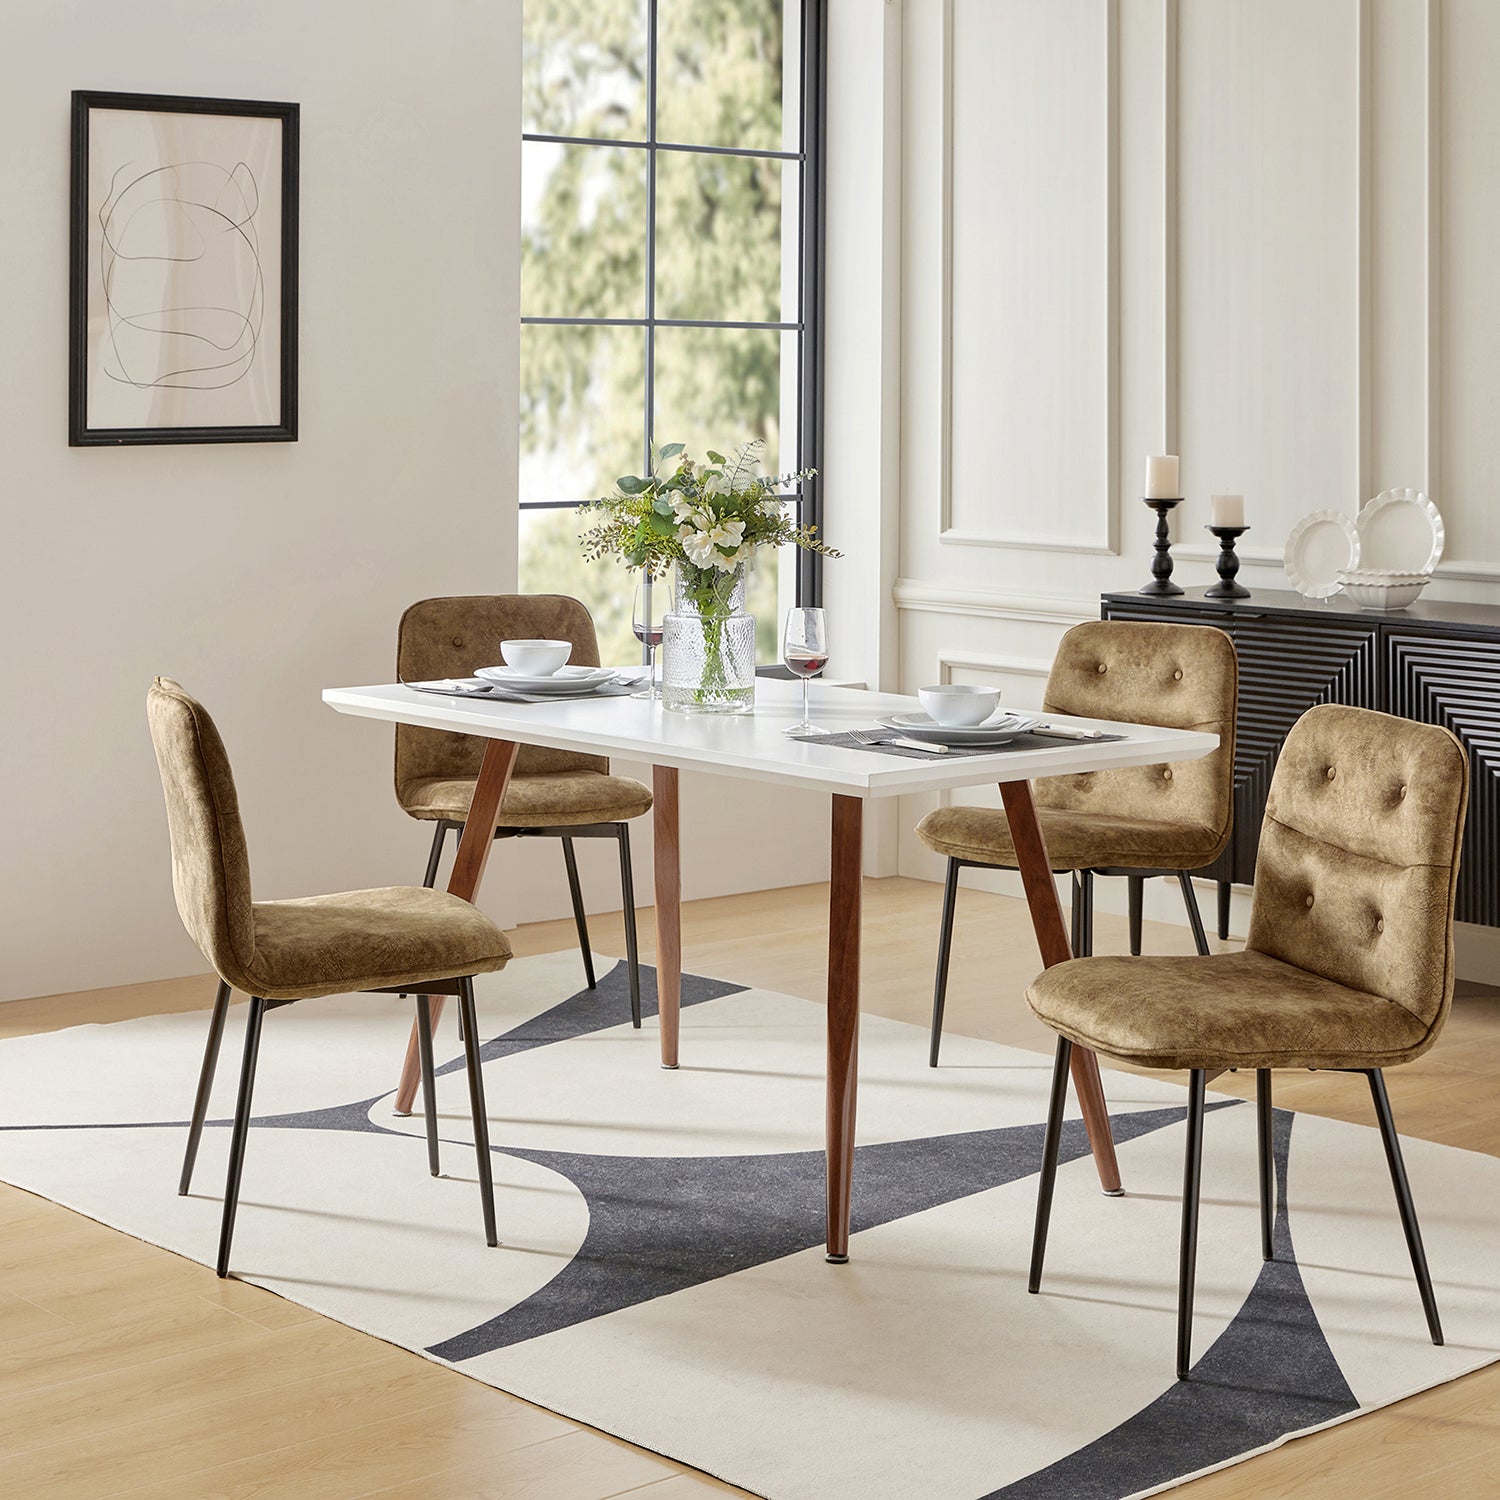 Annie Velvet Solid Back Dining Chair (Set of 4)